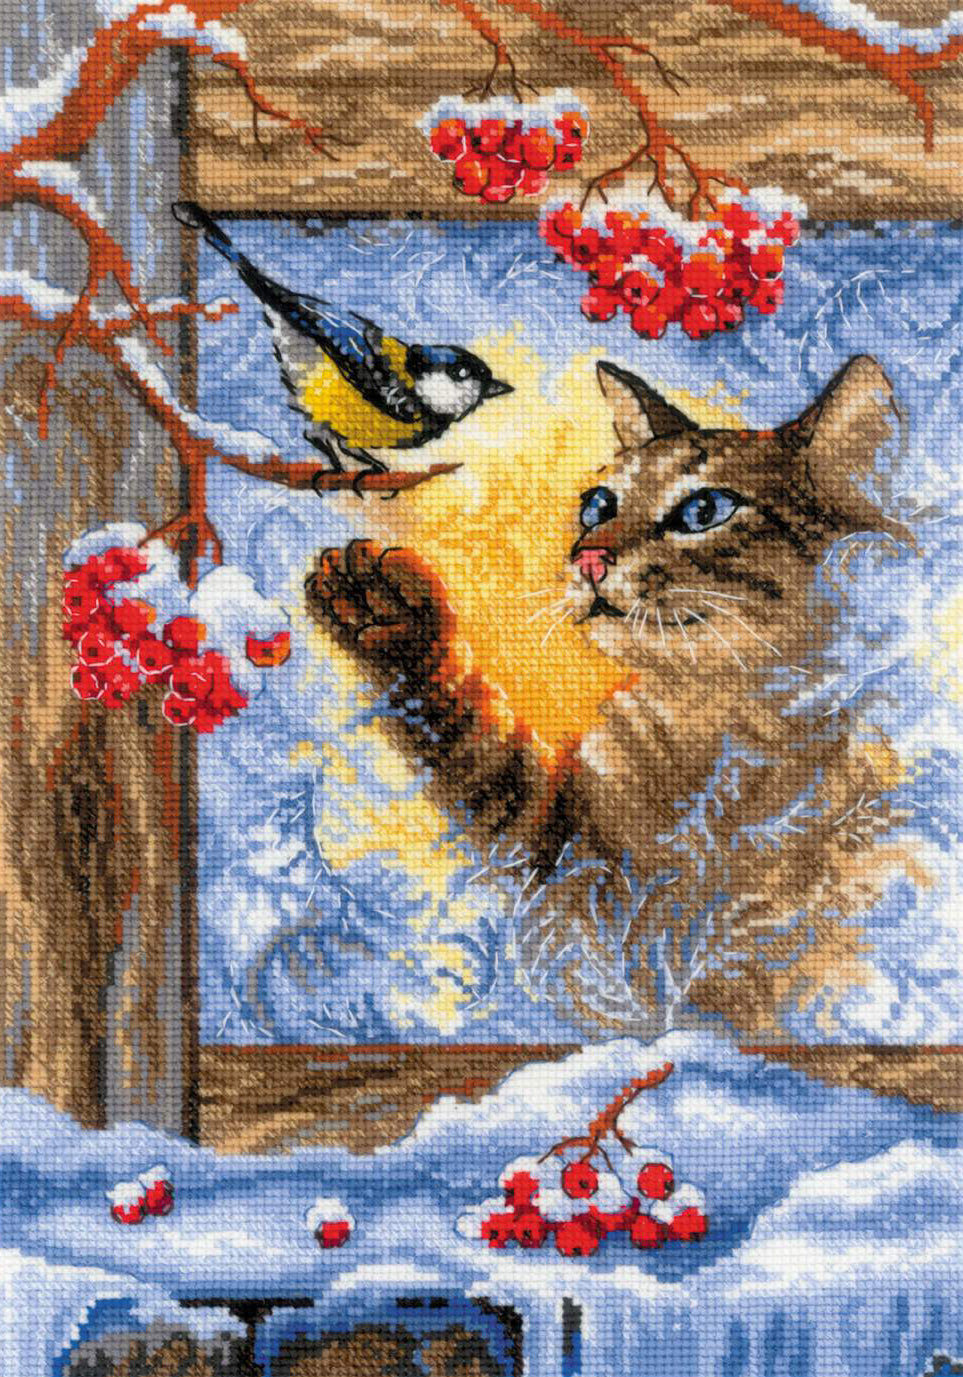 Cross Stitch Embroidery Kit - "Meeting at the Window" - Riolis 2049